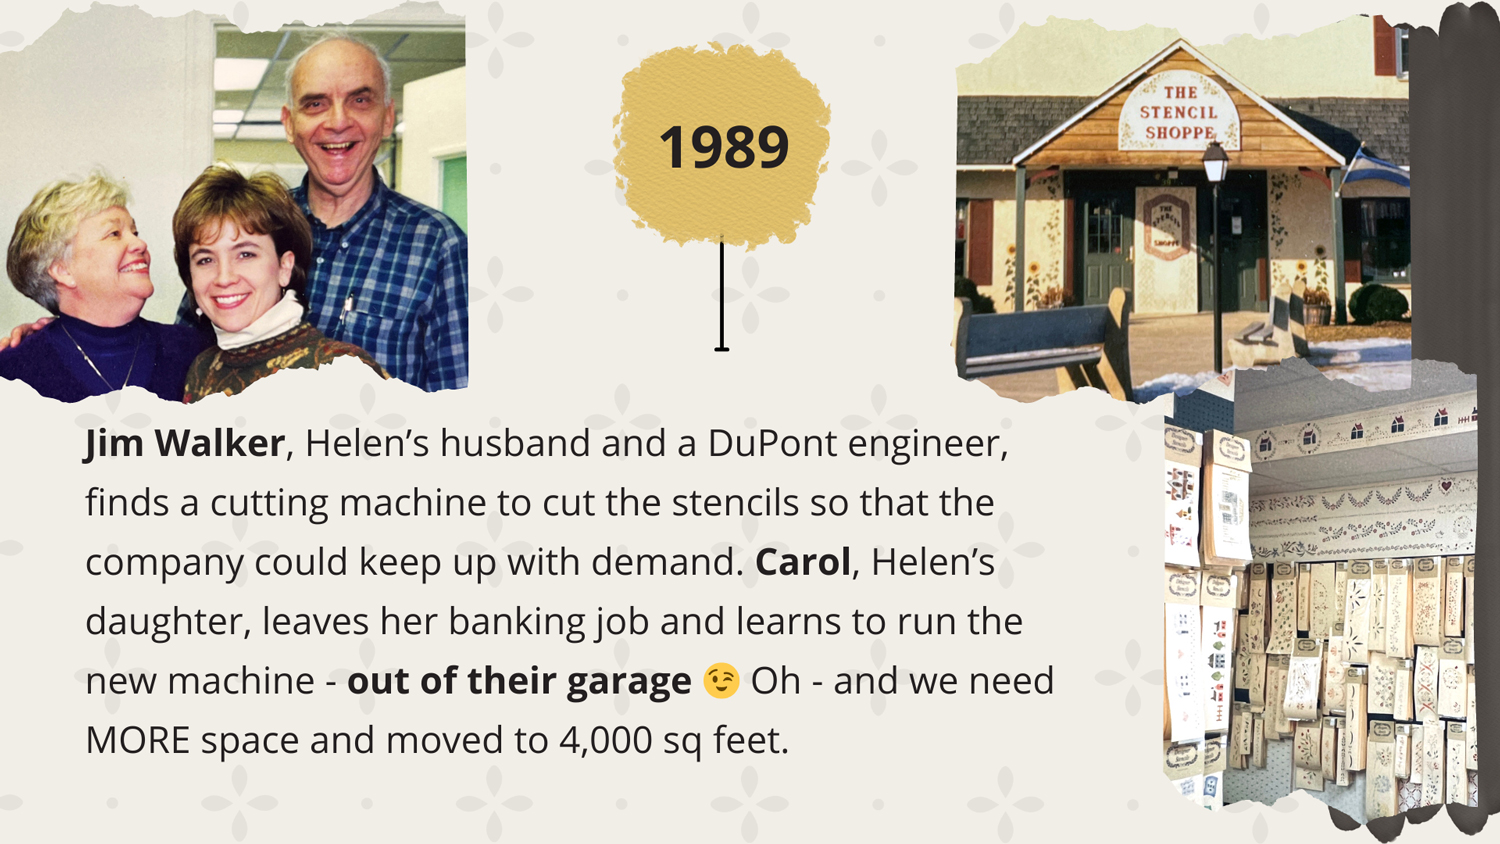 1989 - Jim Walker, Helen’s husband and a DuPont engineer, finds a cutting machine to cut the stencils so that the company could keep up with demand. Carol, Helen’s daughter, leaves her banking job and learns to run the new machine - out of their garage ;) Oh - and we need MORE space so we move to 4,000 sq feet.